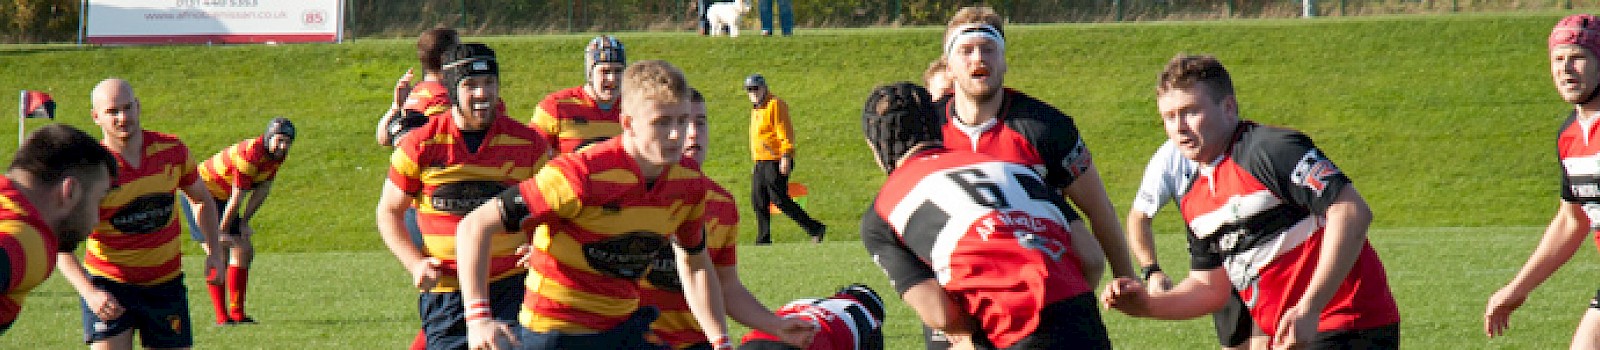 West put up a brave fight at Lasswade